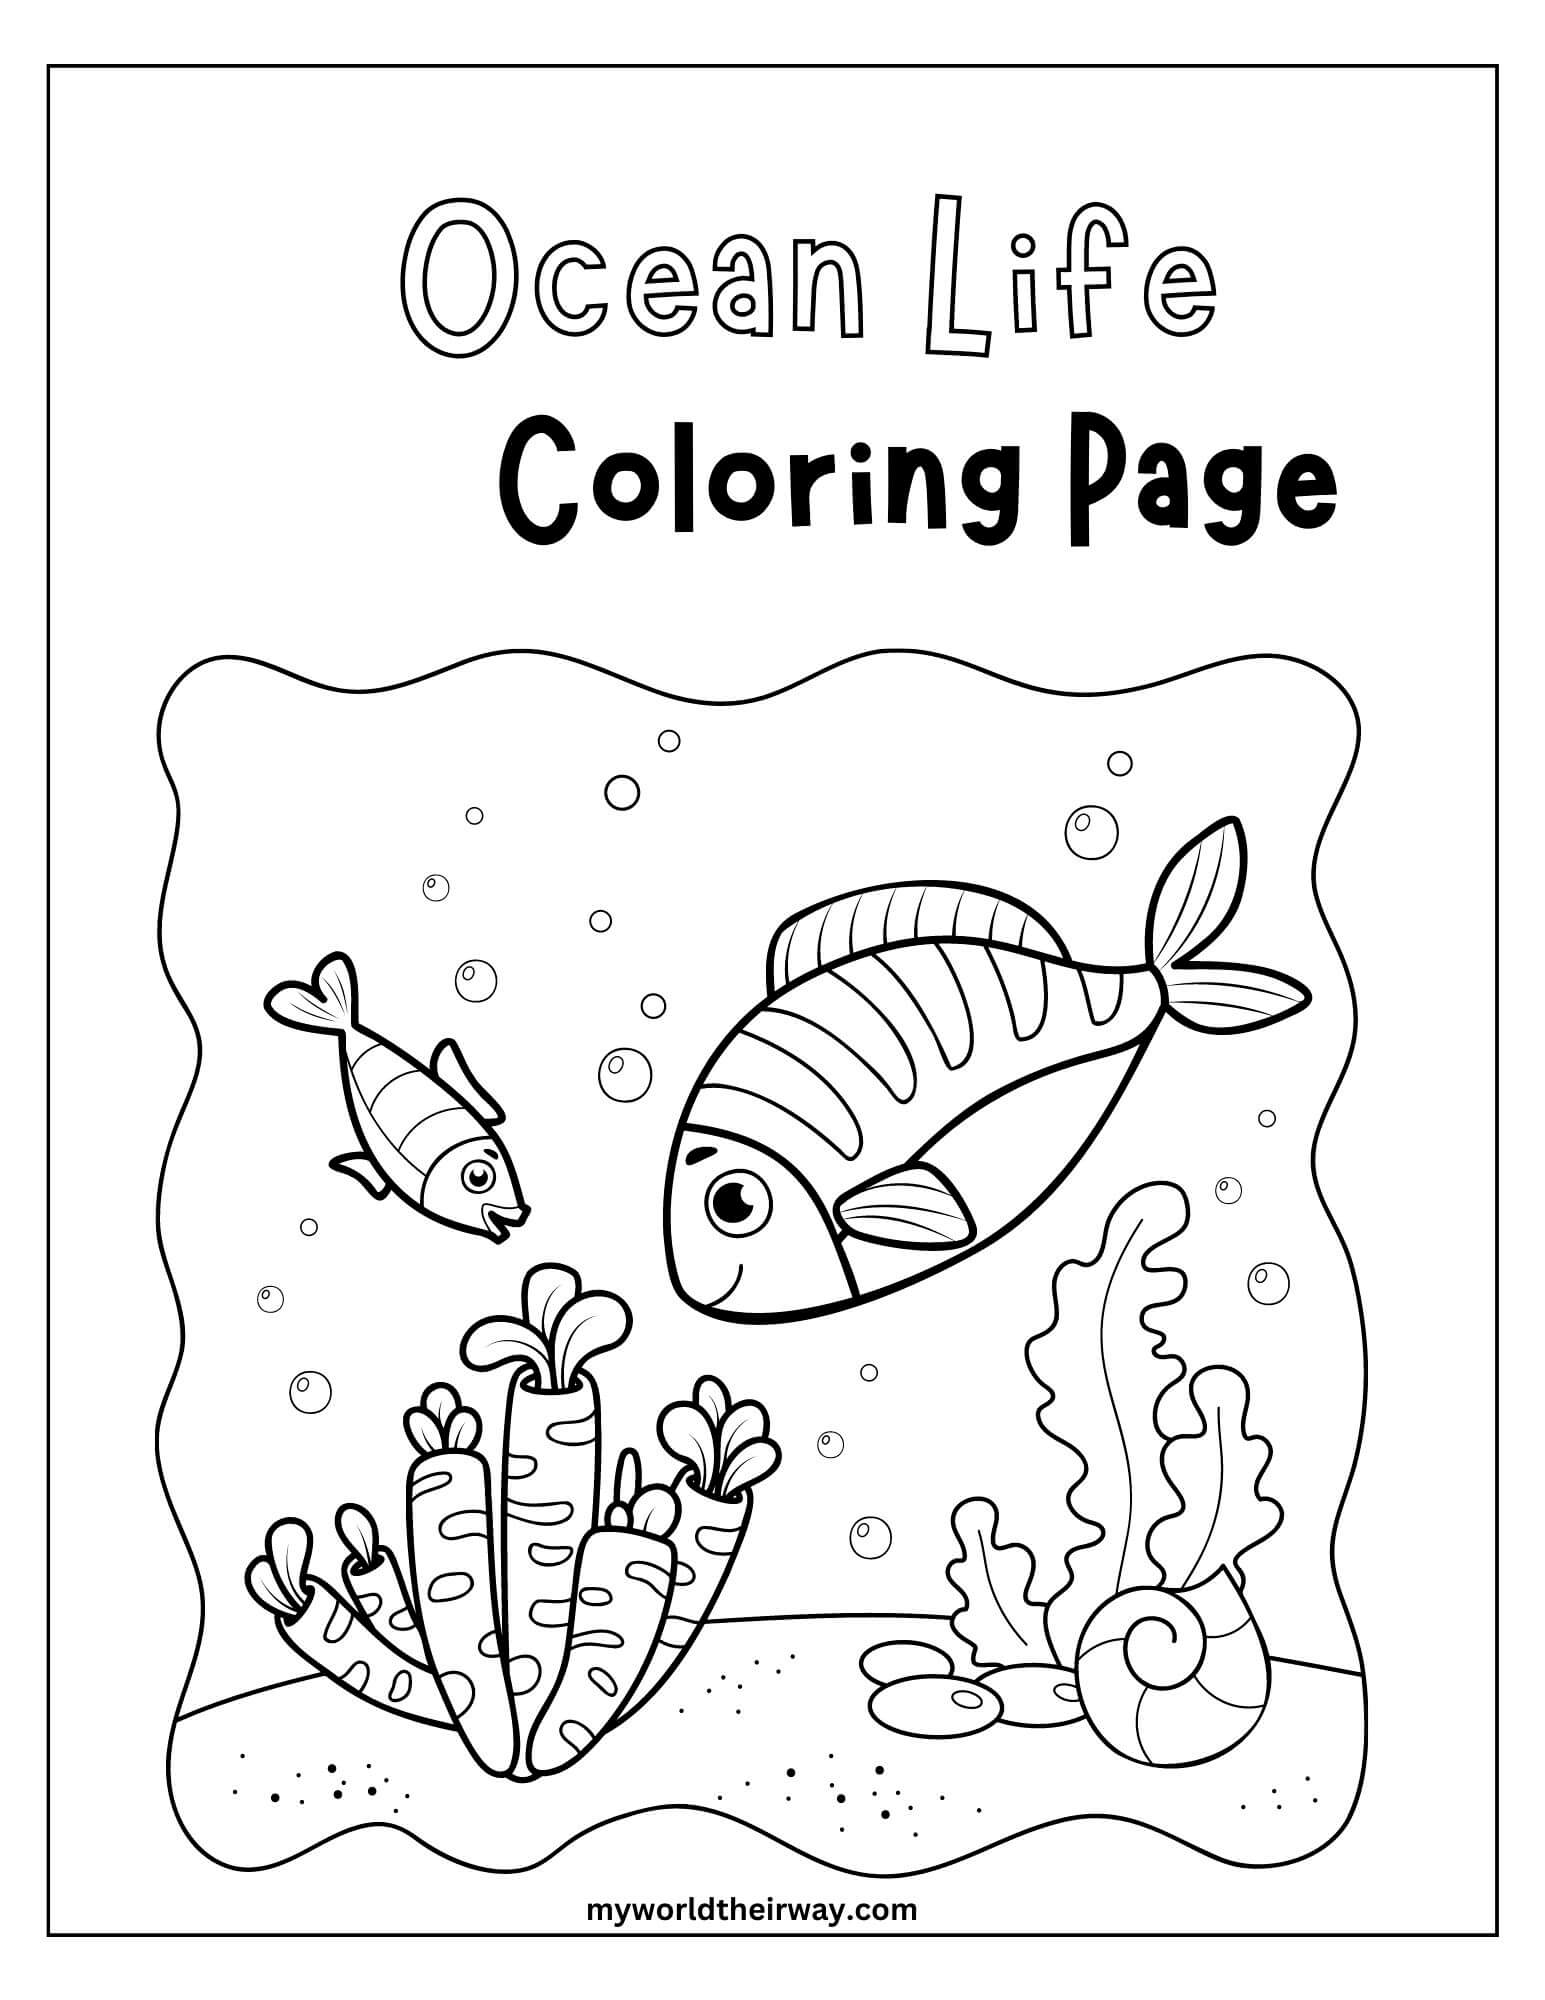 Celebrate Freedom with 4th of July: 180+ Free Coloring Pages 79